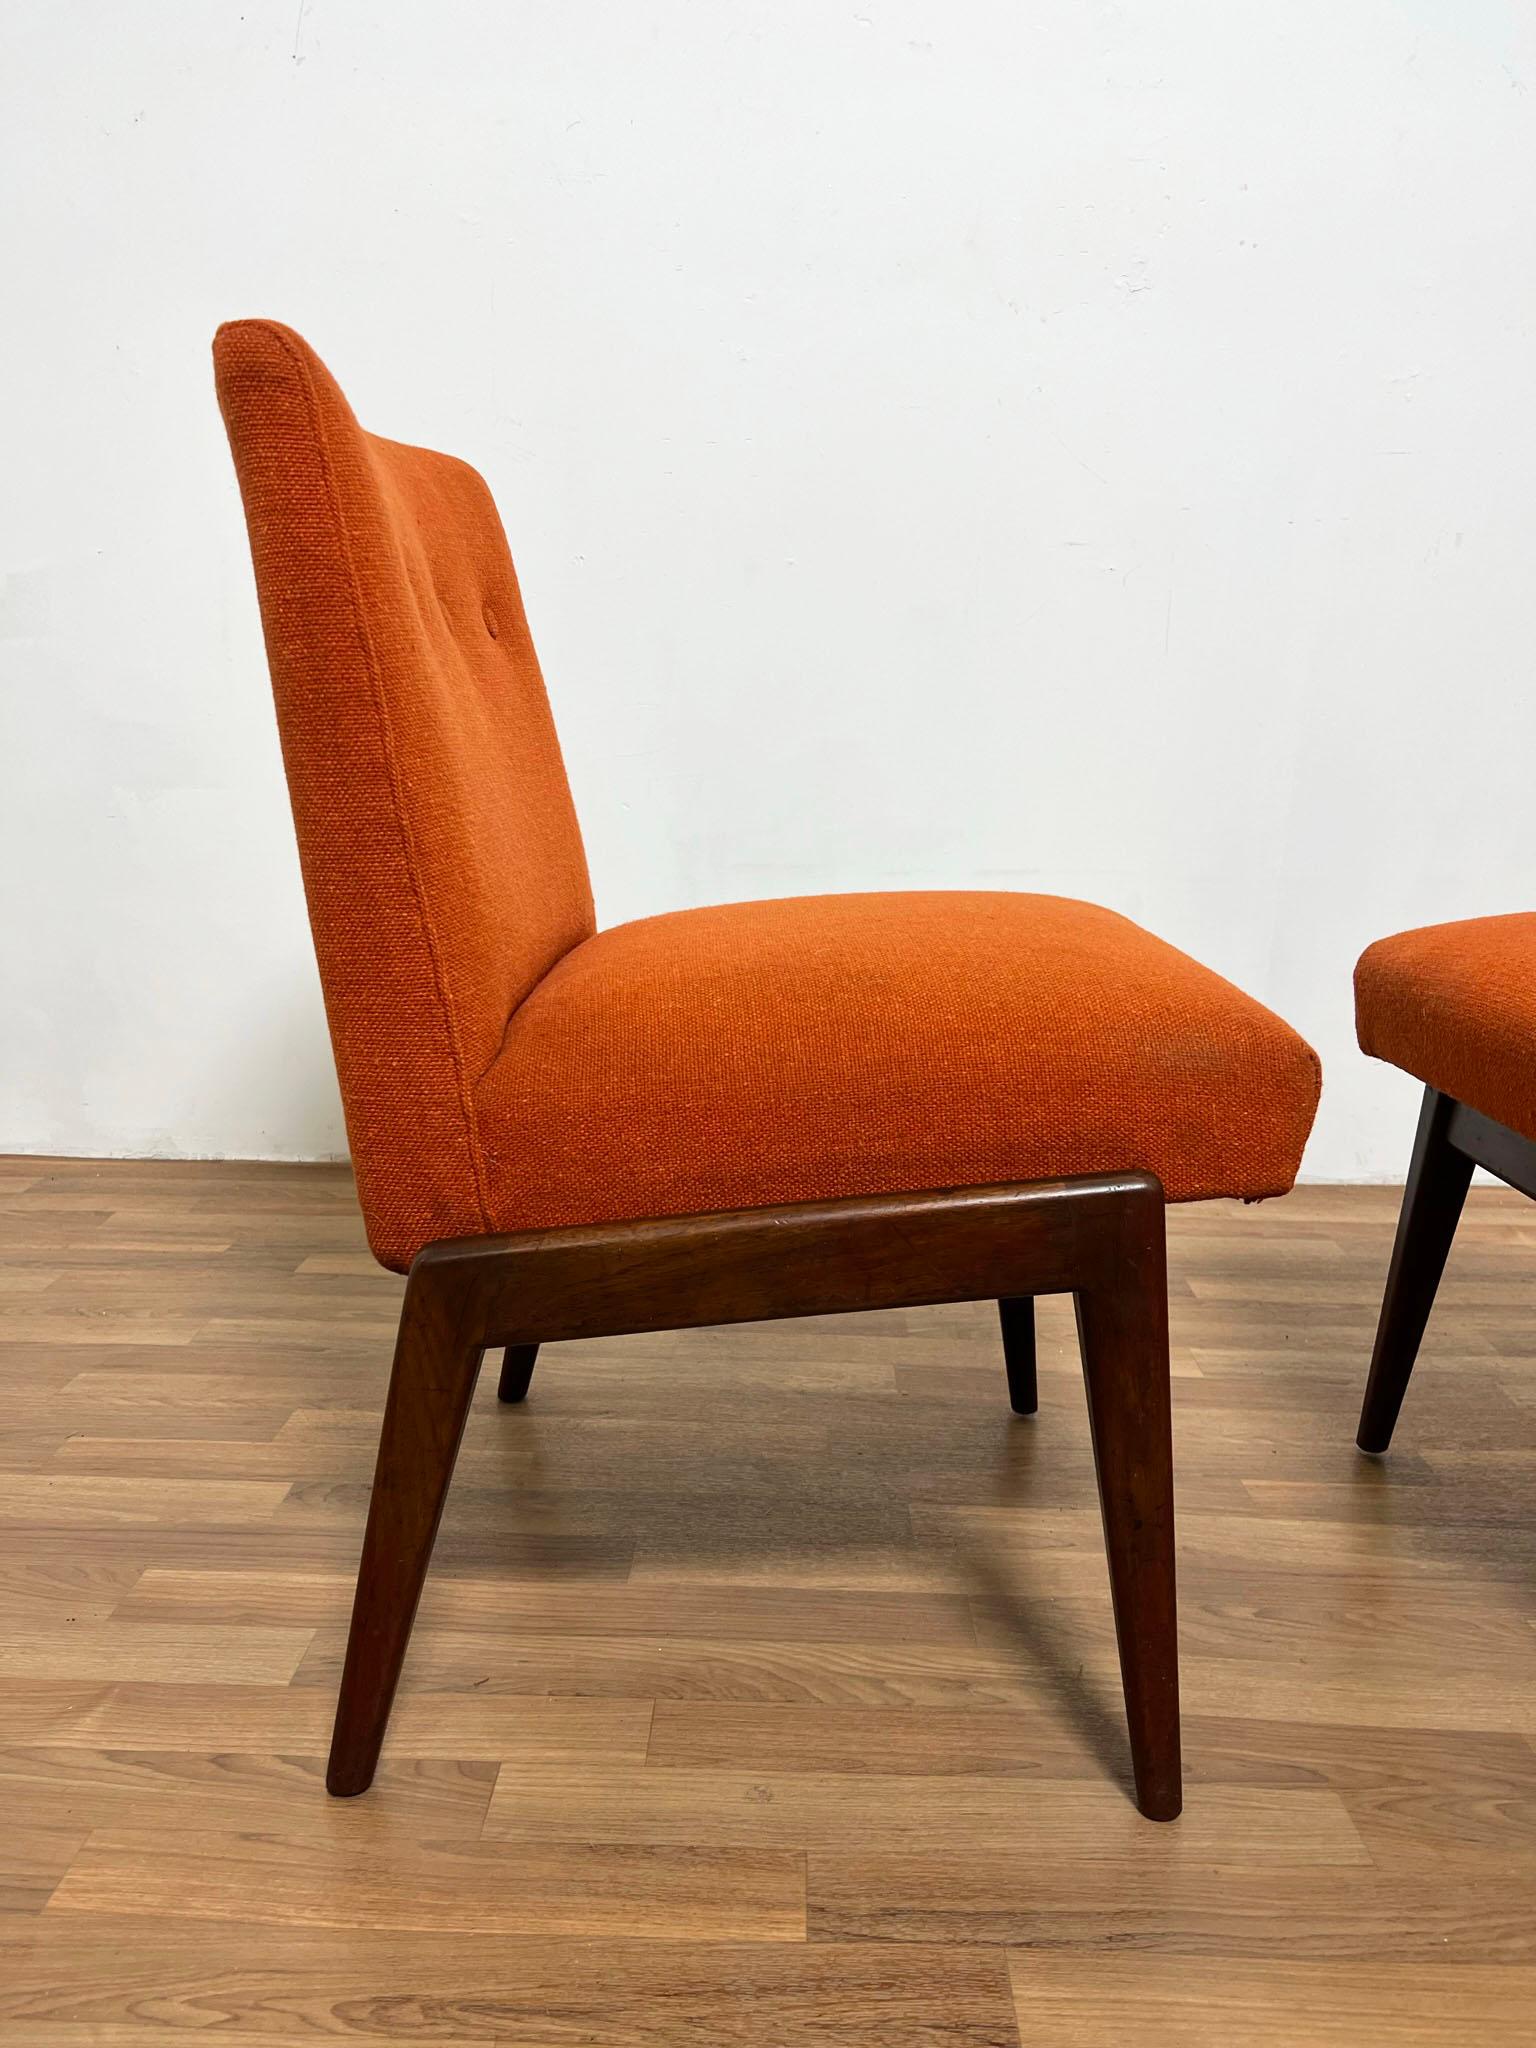 Mid-Century Modern Pair of Jens Risom C-220 Lounge Chairs Circa 1950s For Sale